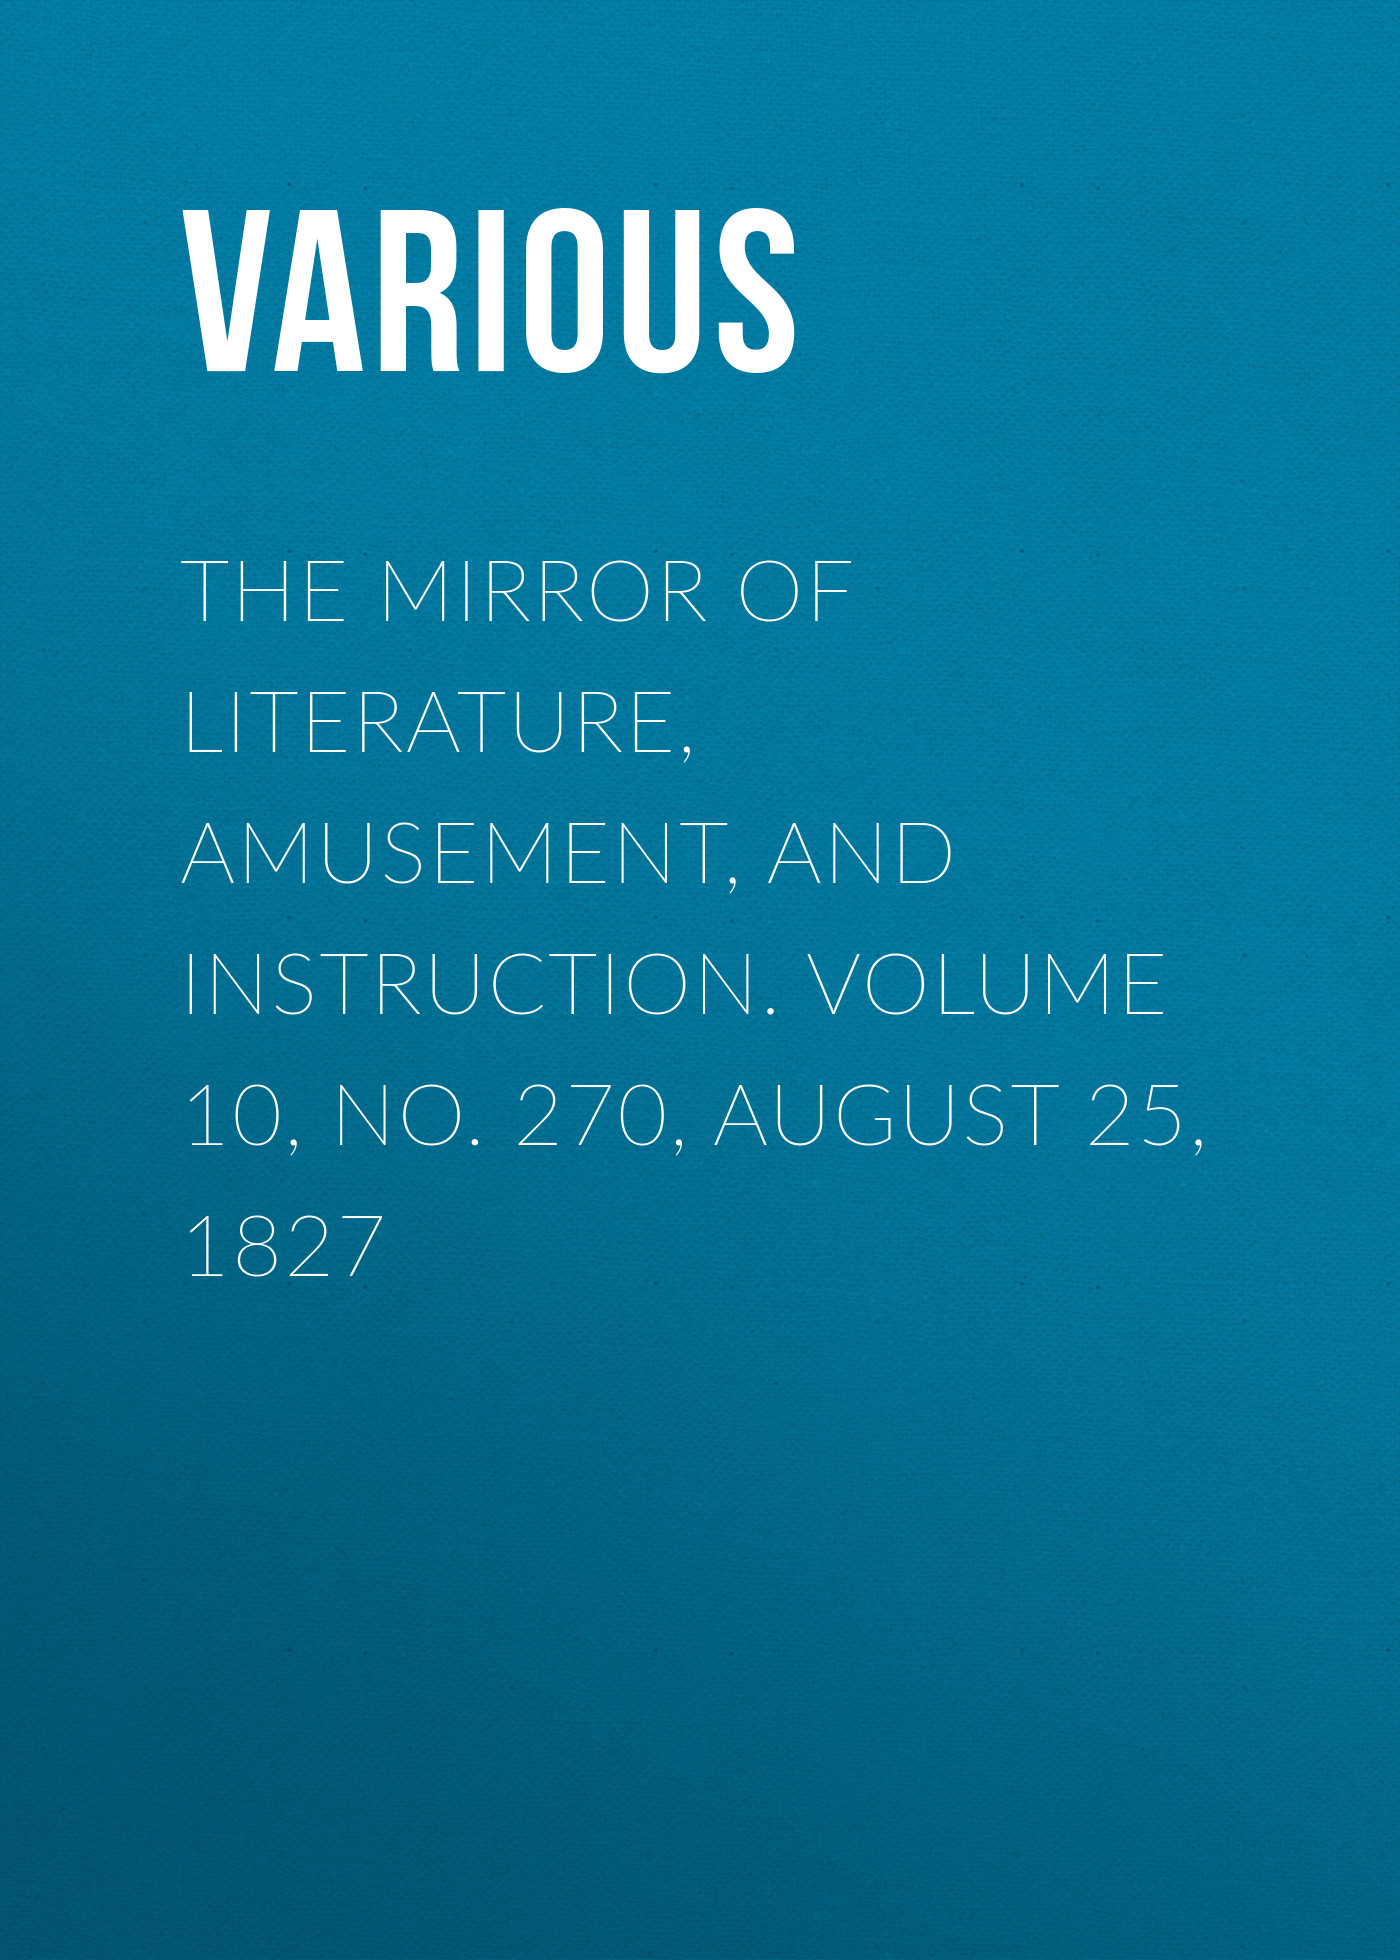 The Mirror of Literature, Amusement, and Instruction. Volume 10, No. 270, August 25, 1827